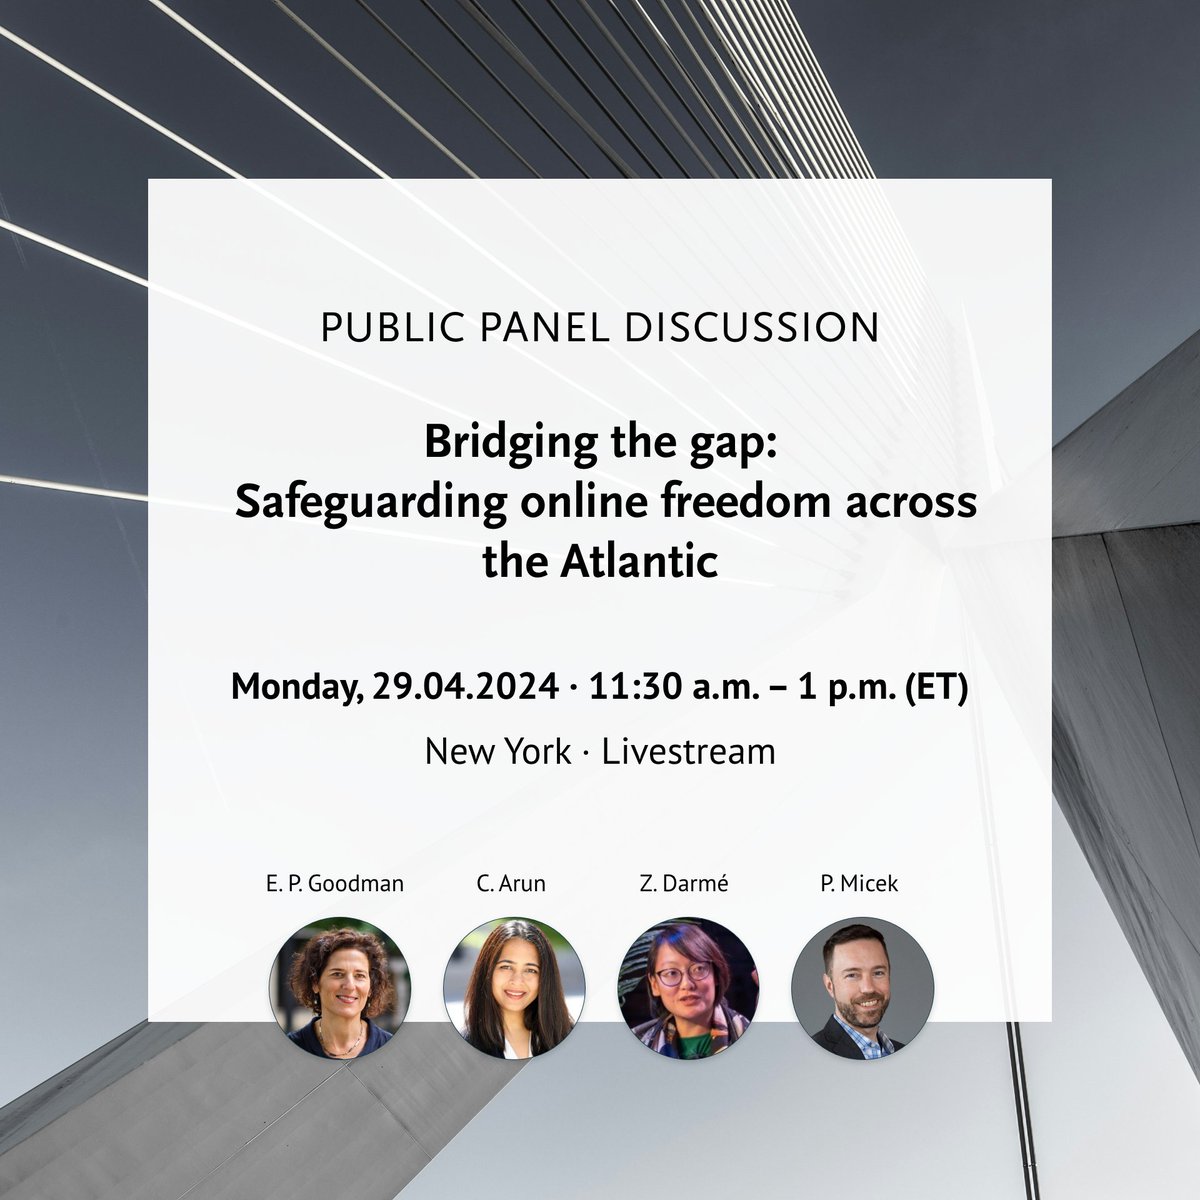 Exciting news! We're thrilled to announce that @ZoeDarme will be joining @ellgood, @lawyerpants and Chinmayi Arun (@yaleisp) on our panel in #NewYorkCity as our fourth speaker. Our lineup of experts will discuss #freedomofspeech across #socialmedia and #contentmoderation.